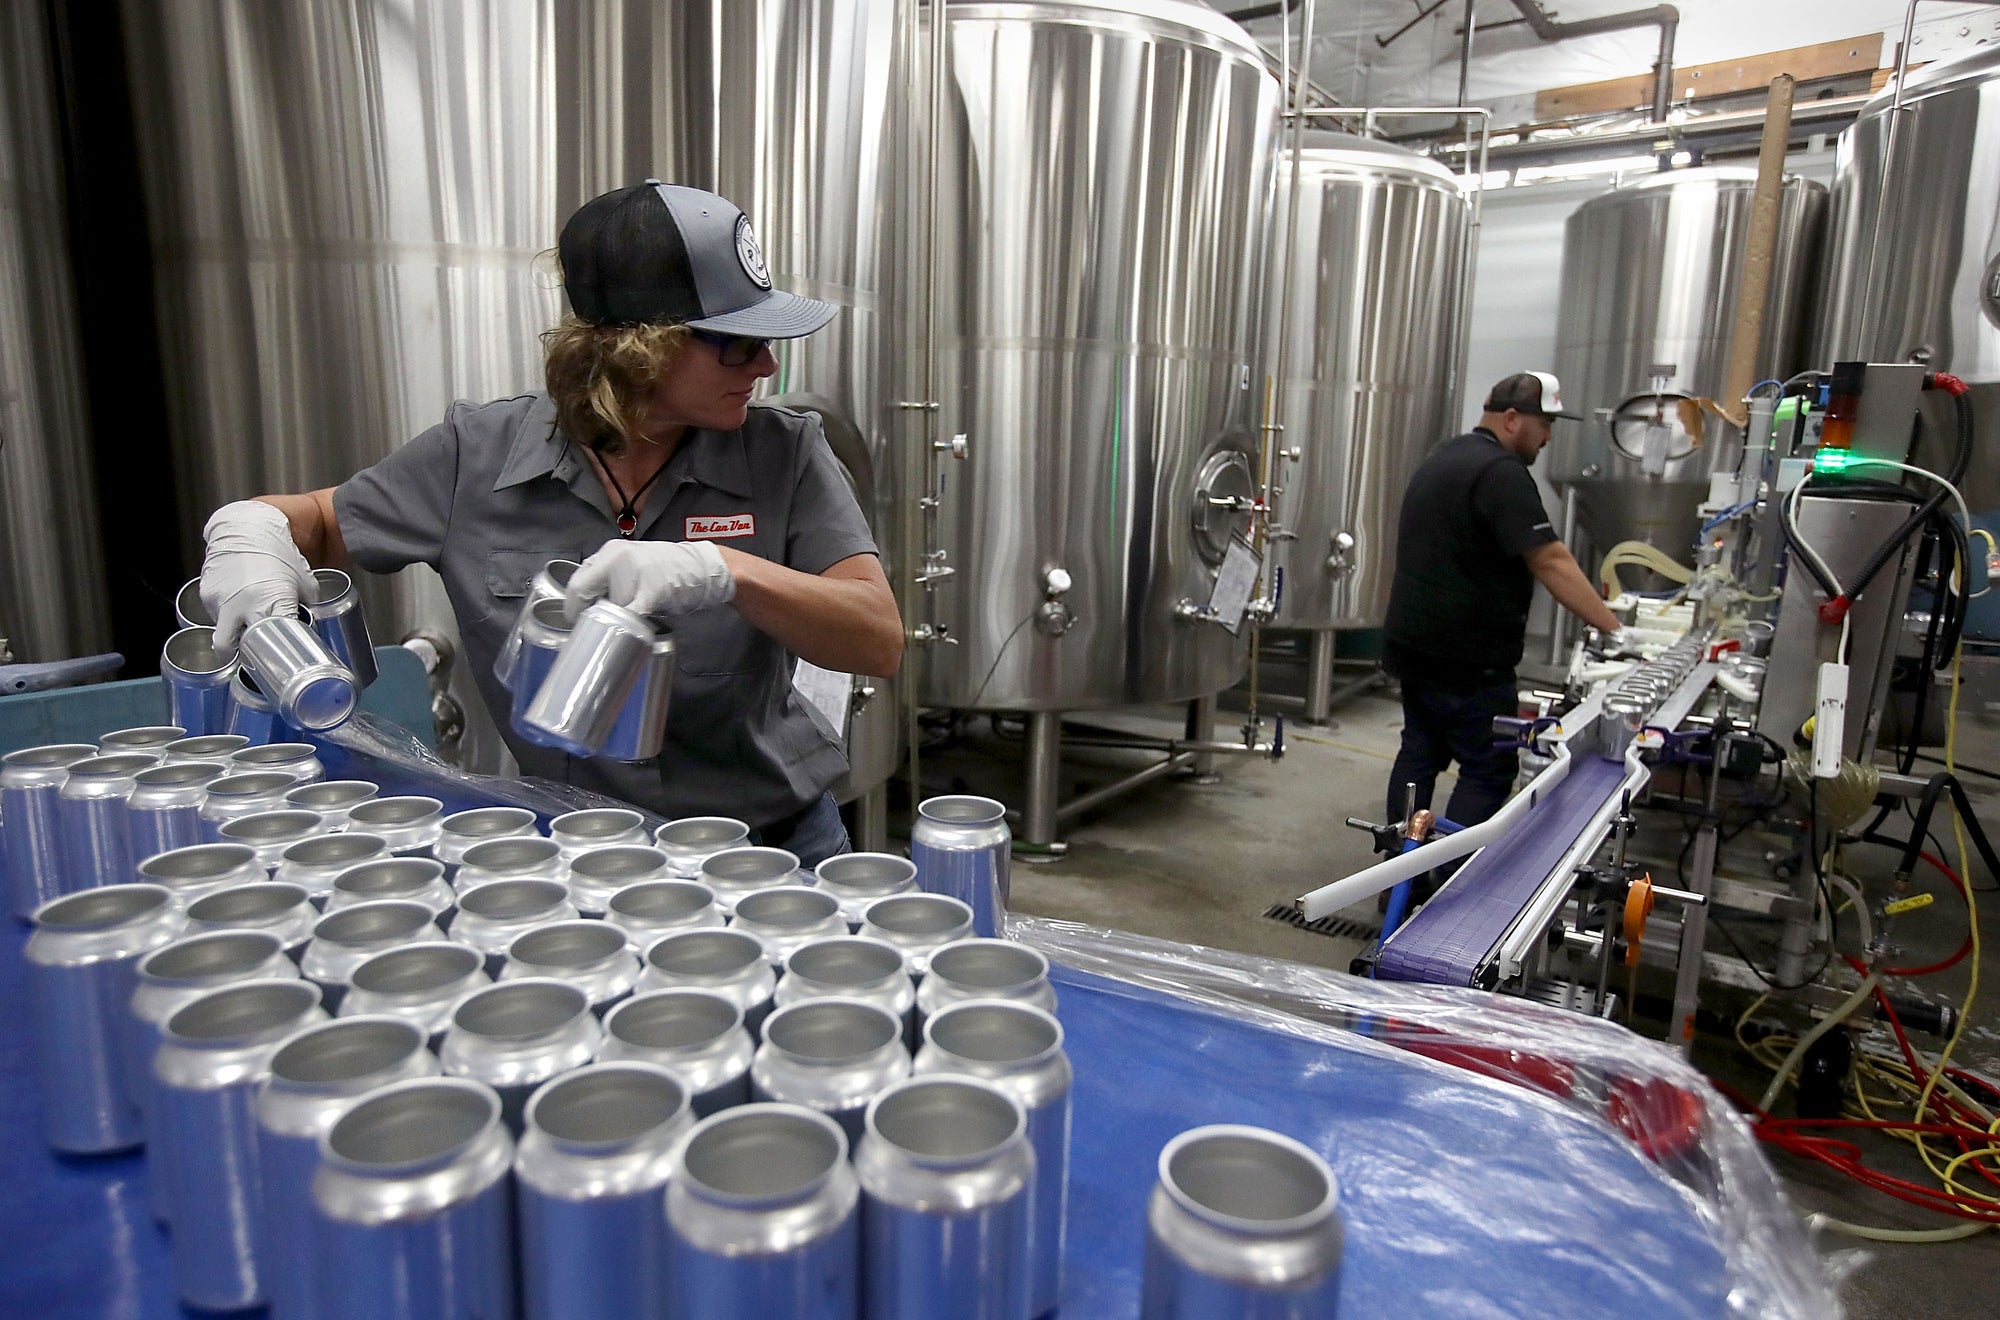 A person holds empty cans in a room full of large stainless steel tanks.